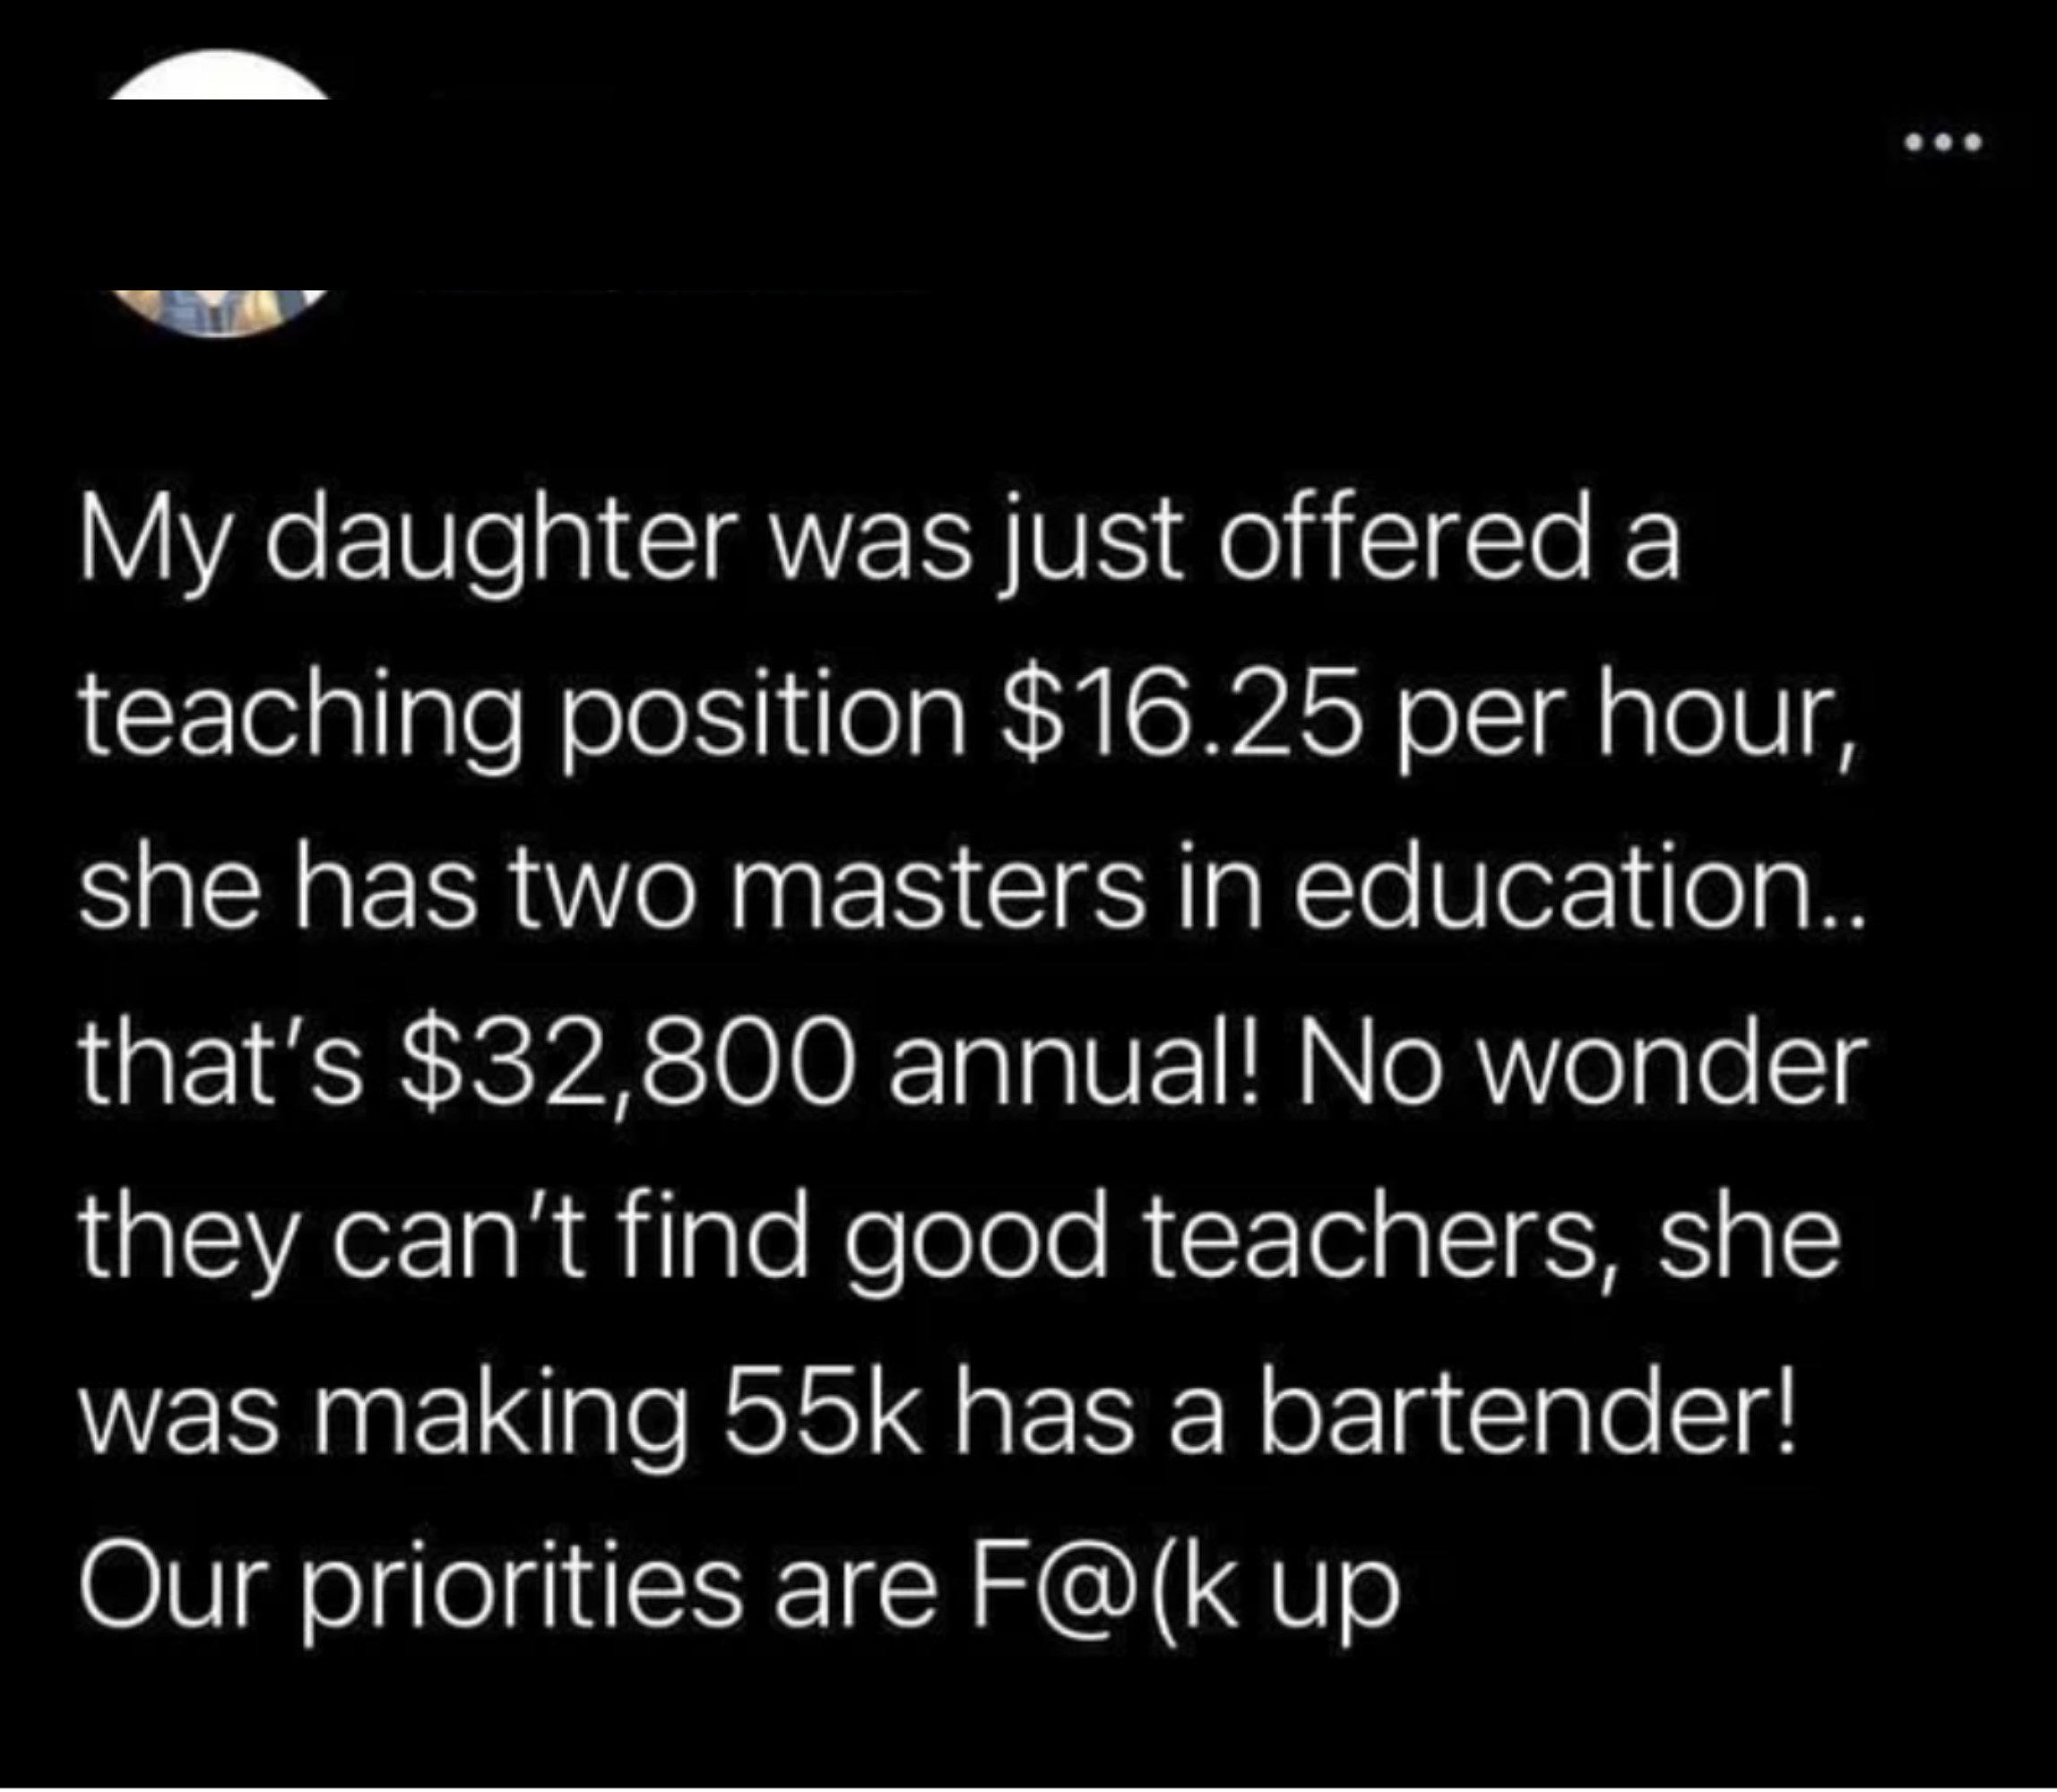 Tweet about person&#x27;s daughter with two master&#x27;s degrees in education who was offered a teaching position paying $16/hour but was making $55,000 as a bartender